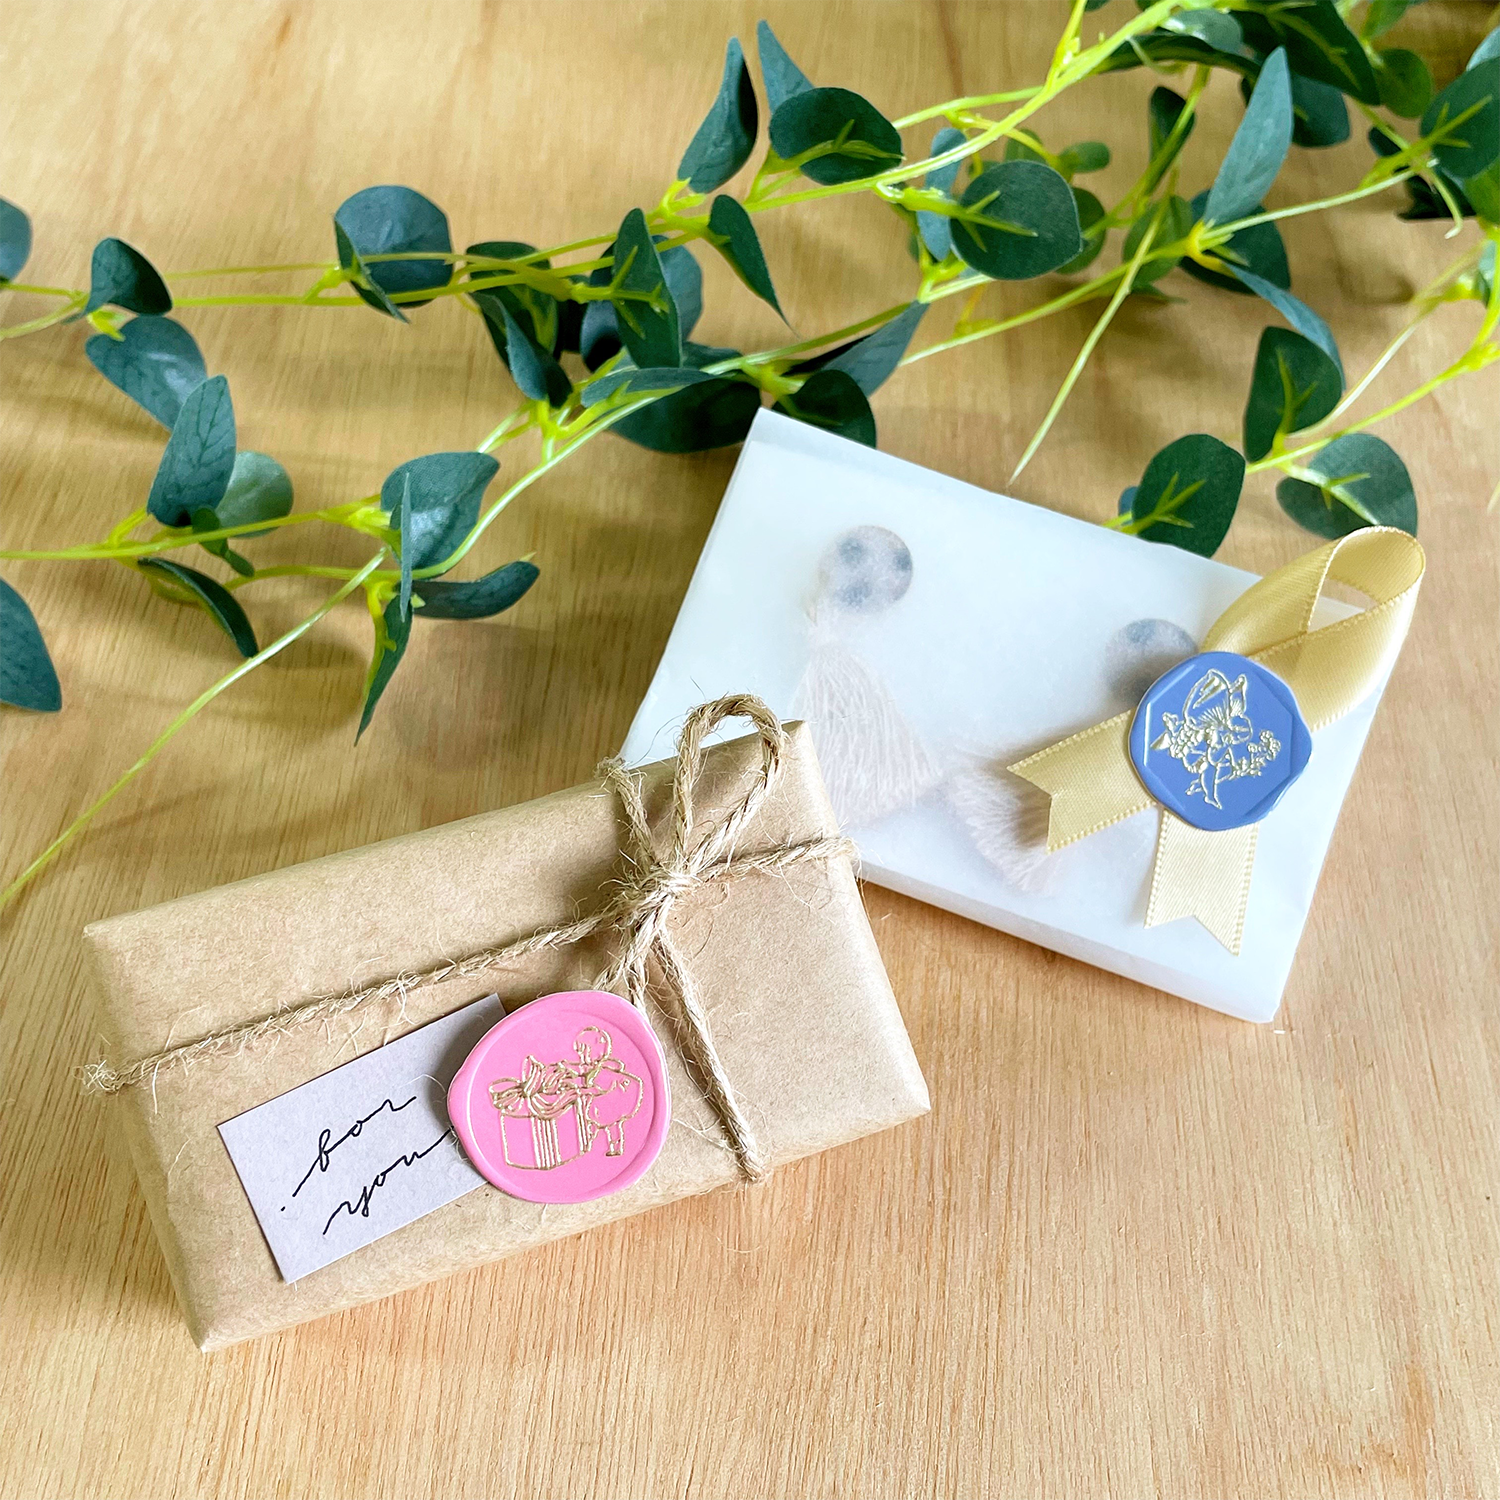 Small packages decorated with ribbon and sticker.